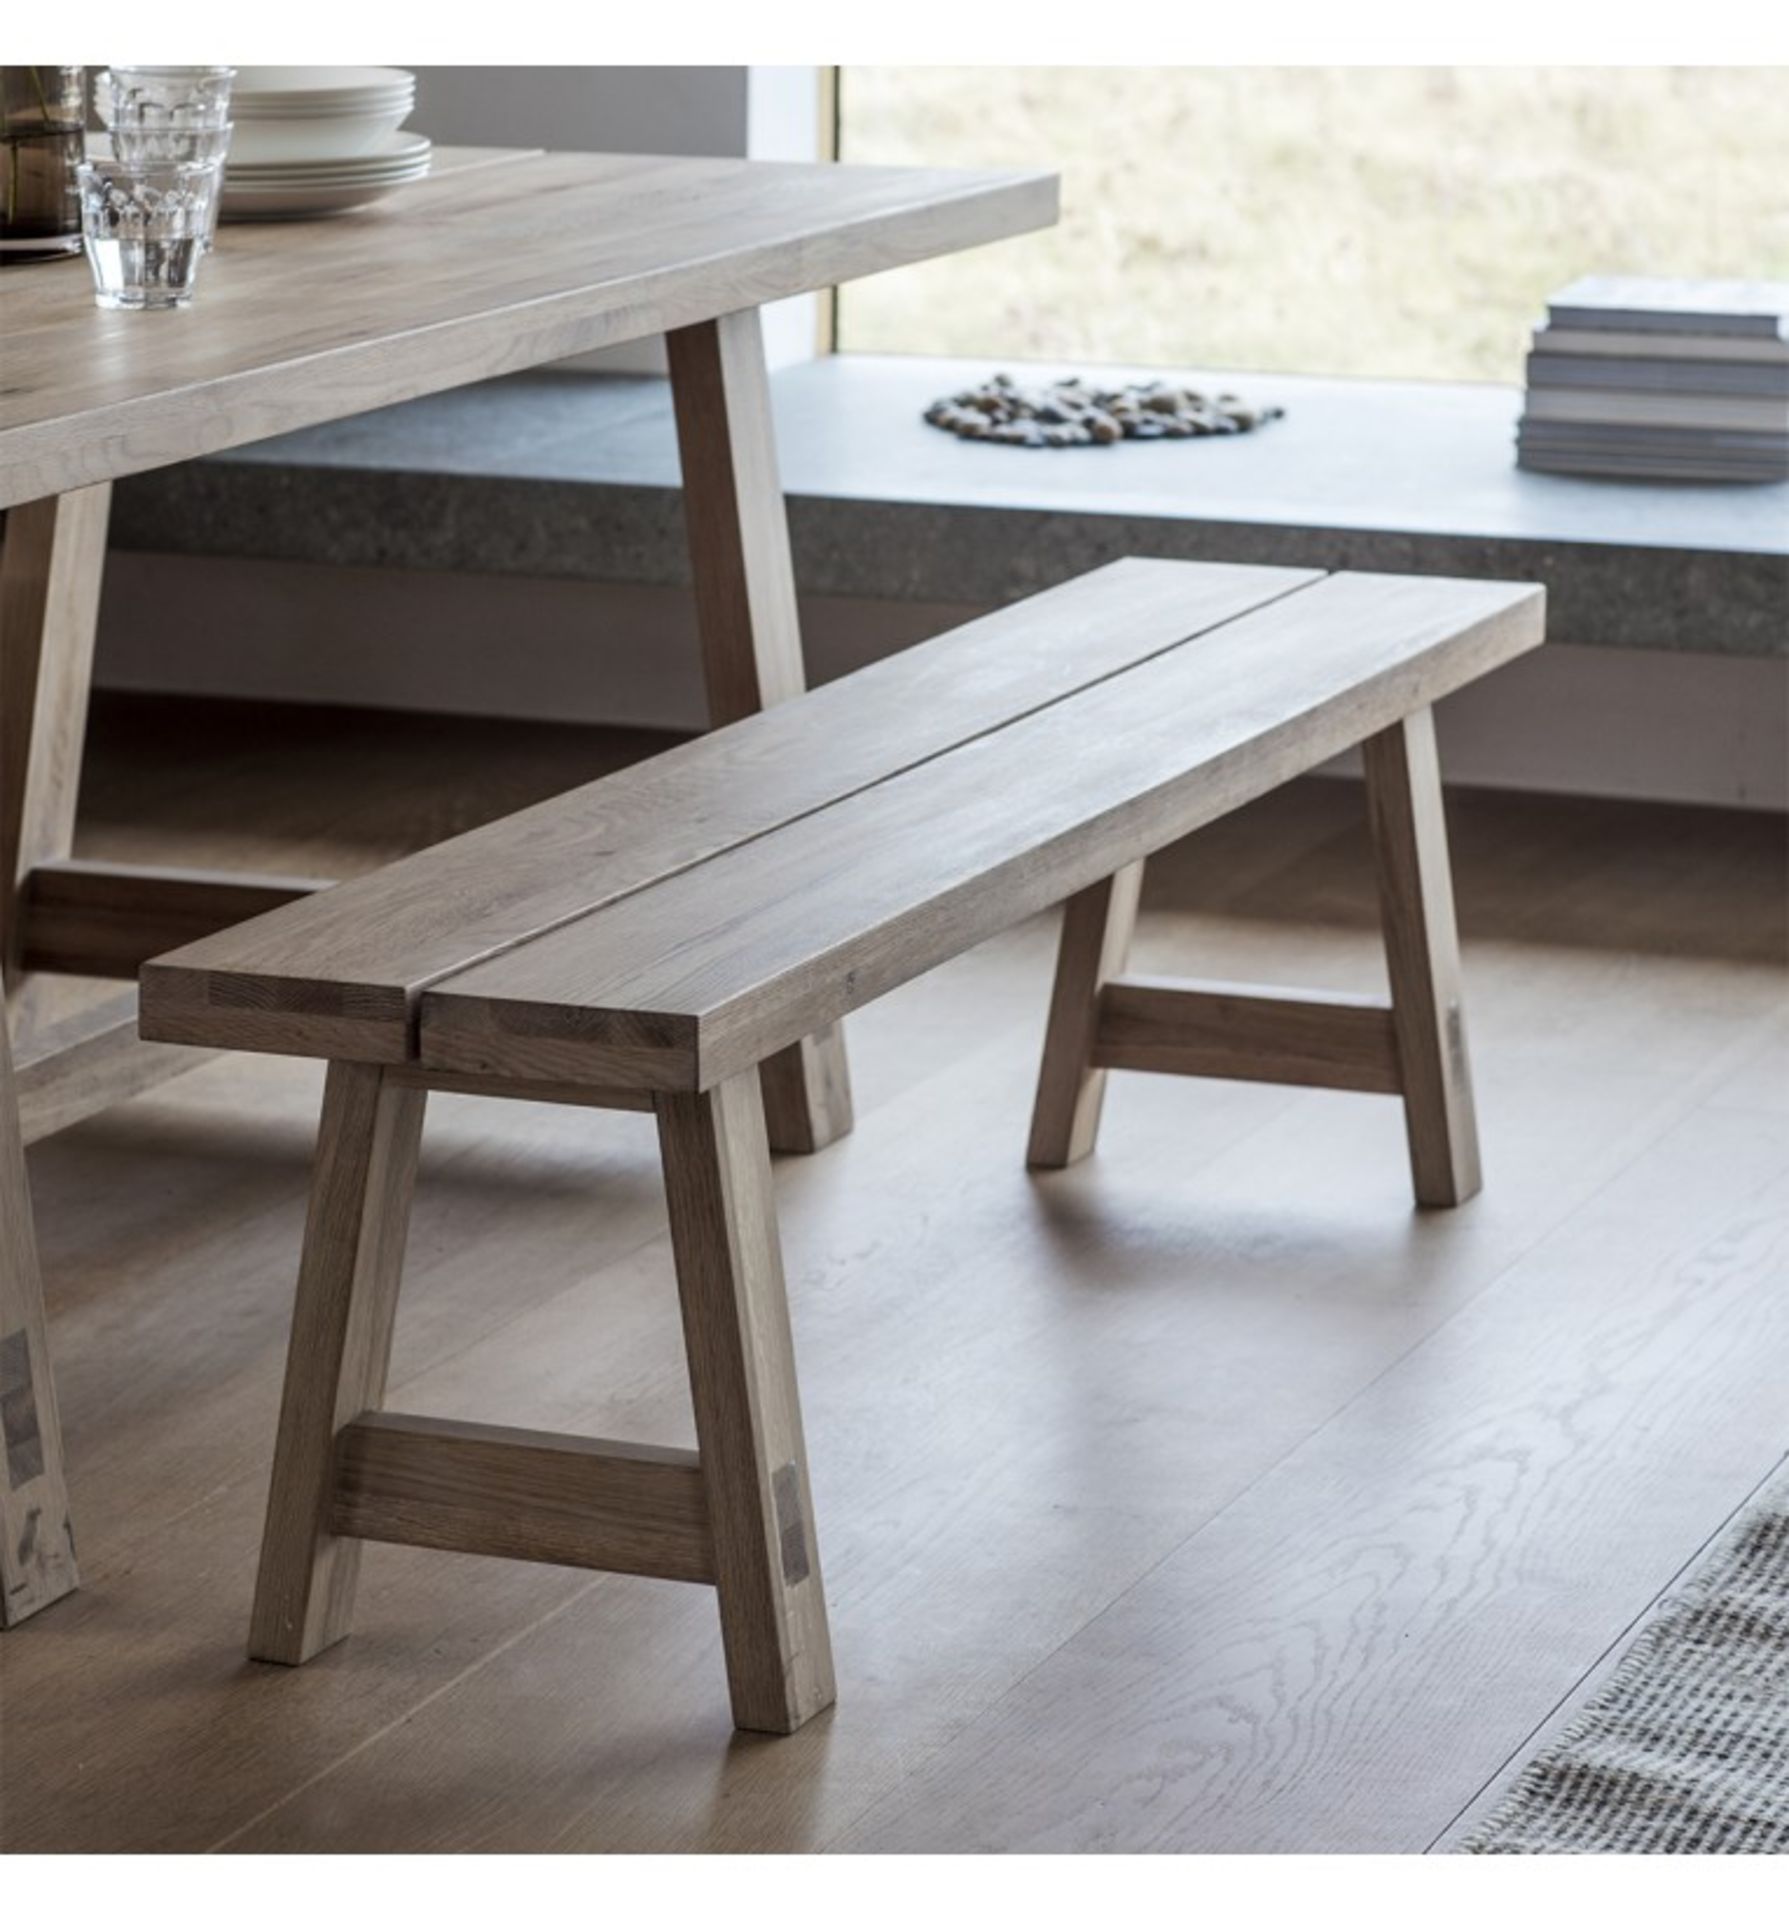 Kielder Bench 1600 x 350 x 450mm An Oak Dining Bench Which Can Be Used Along With Many Different